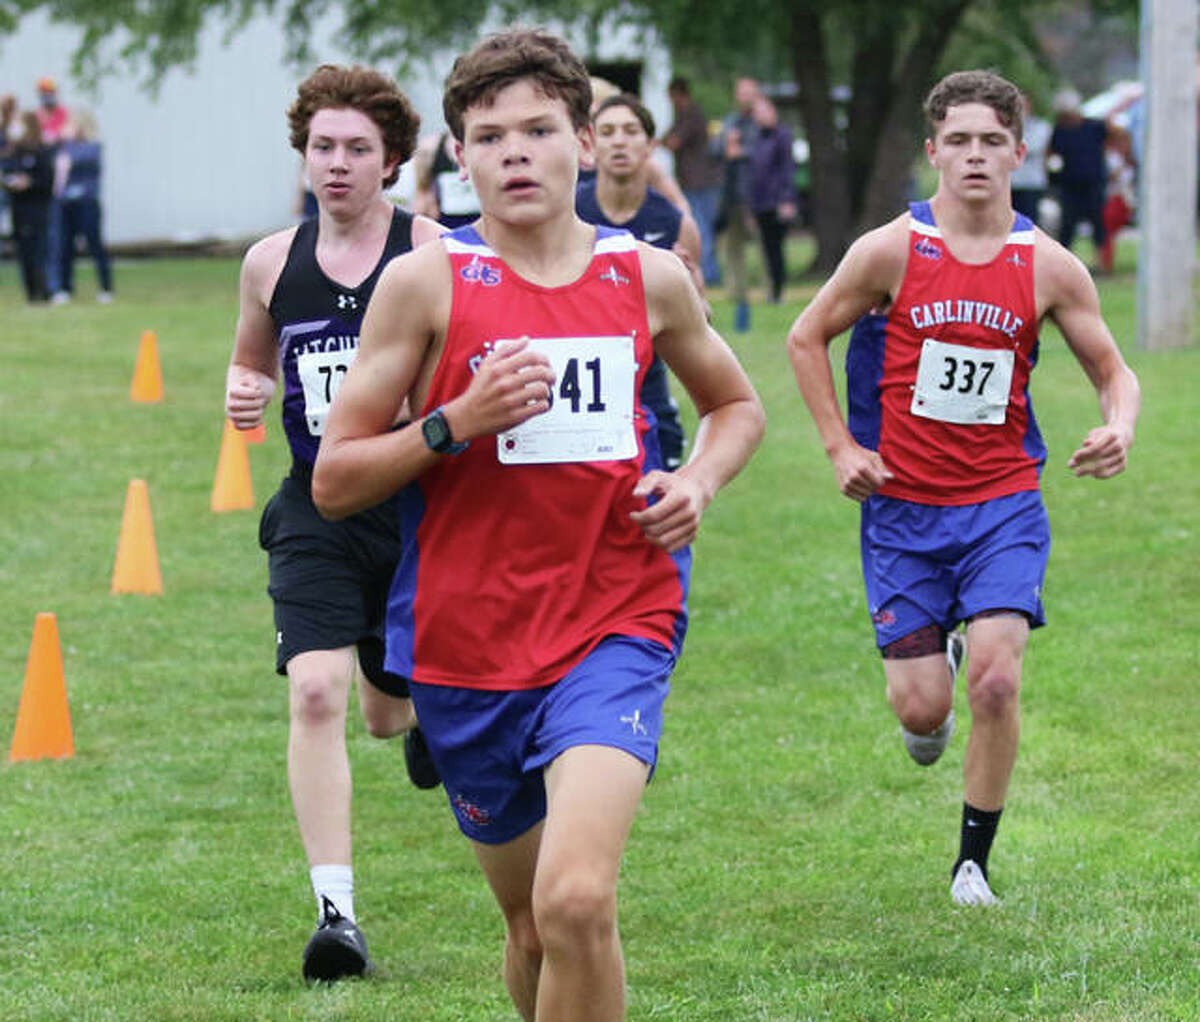 Carlinville’s Will Meyer (front) runs during a race last season at Loveless Park in Carlinville. On Saturday in Piasa, Meyer finished second to lead the Cavaliers to a conference championship in the SCC Meet.